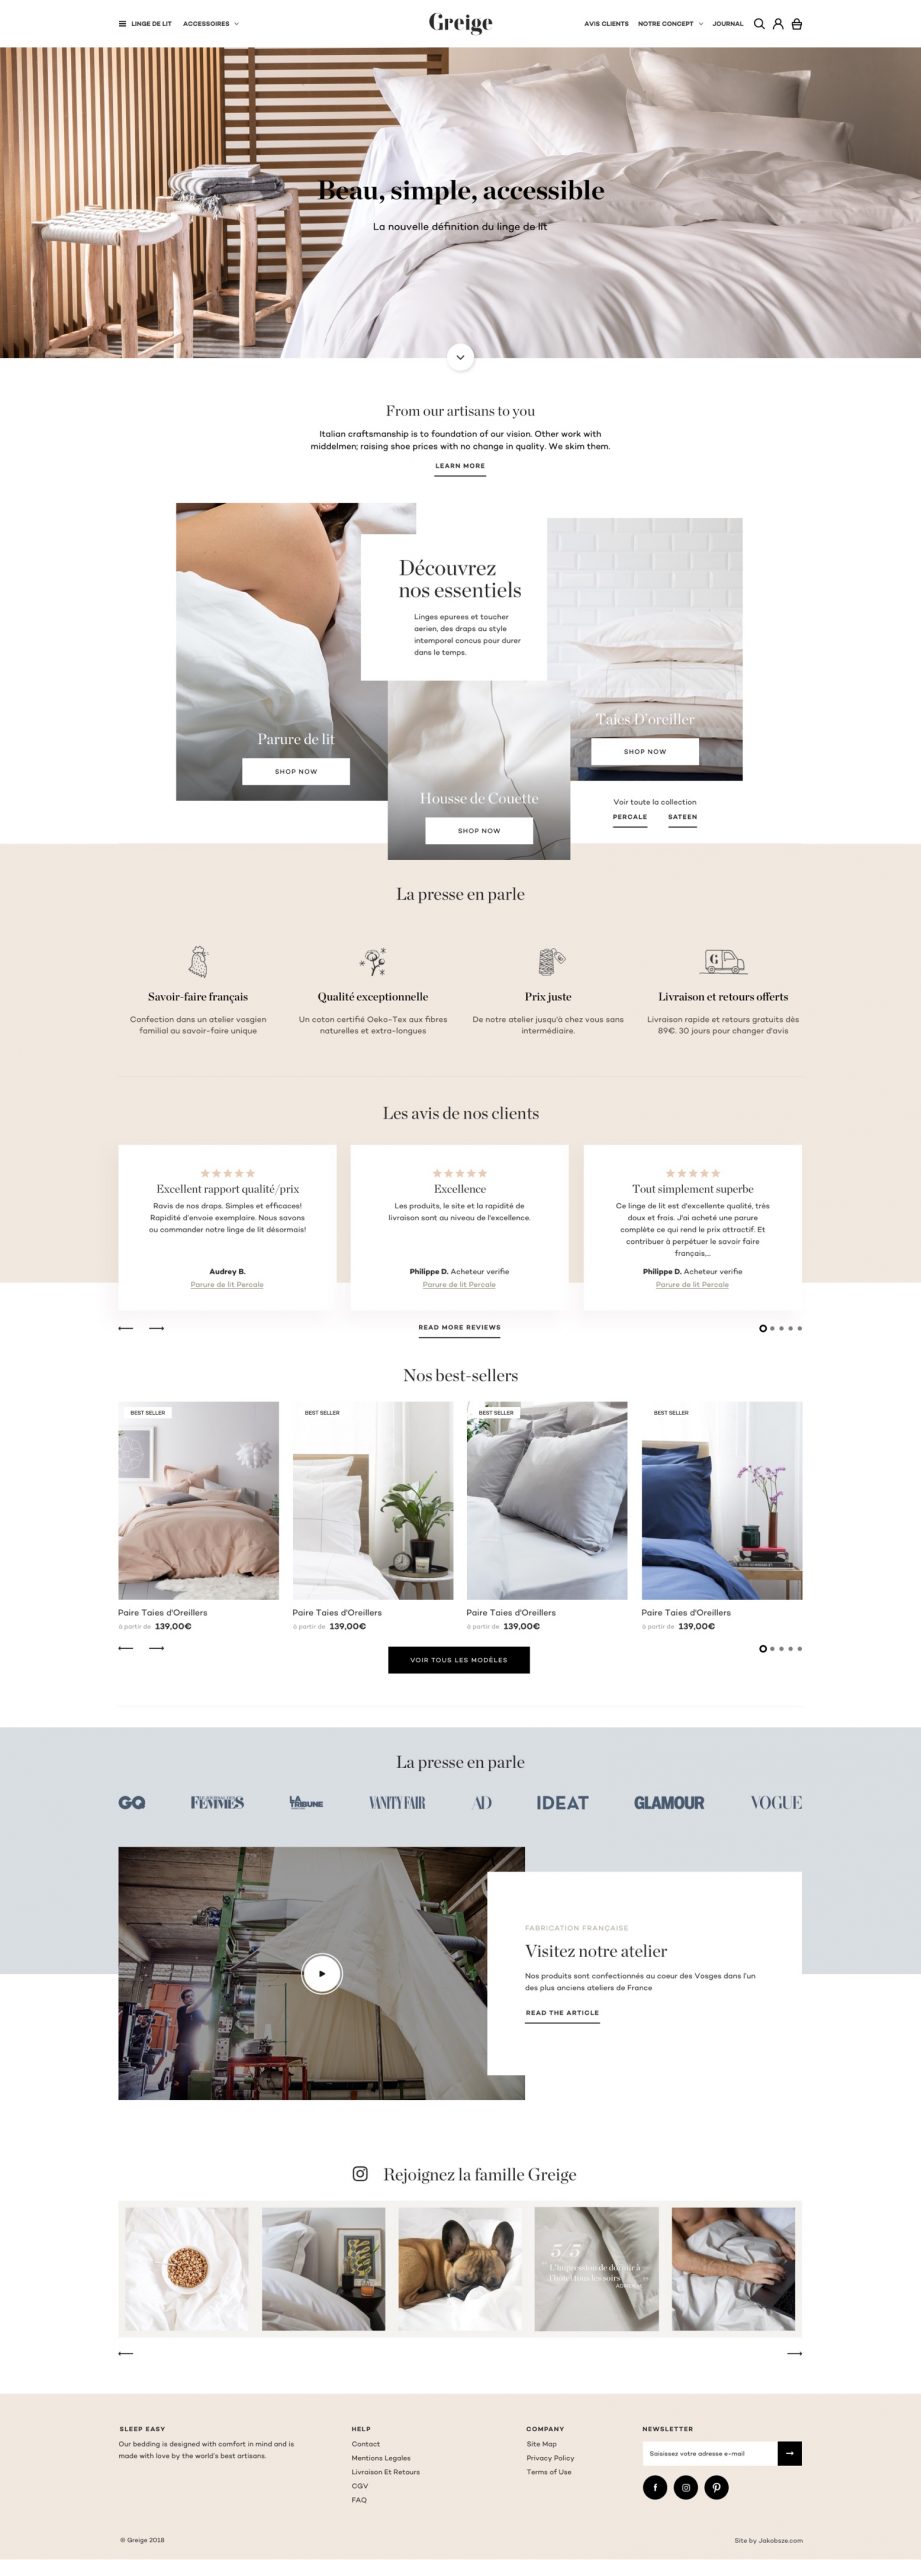 Greige-home-page-NEW-Copy-2